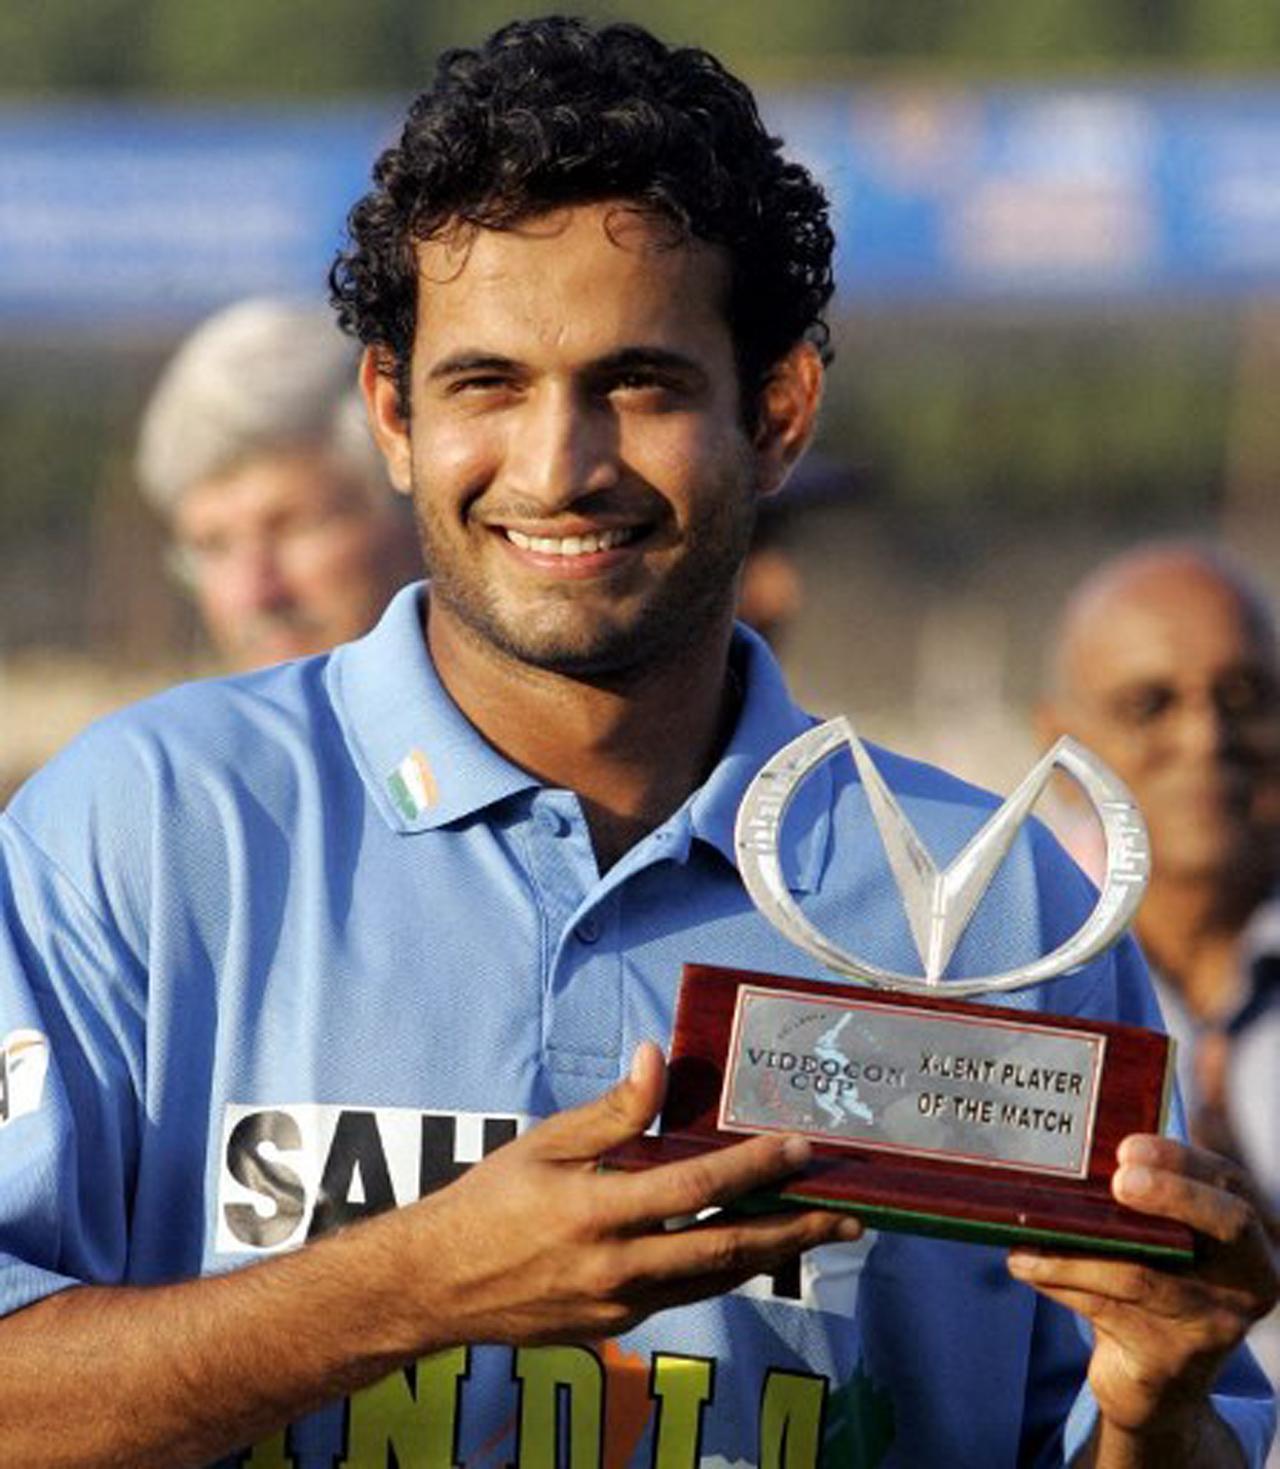 During the inaugural T20 World Cup, Pathan bagged 3 wickets against Pakistan in the final as India won the T20 World Cup title. Irfan was named man-of-the-match